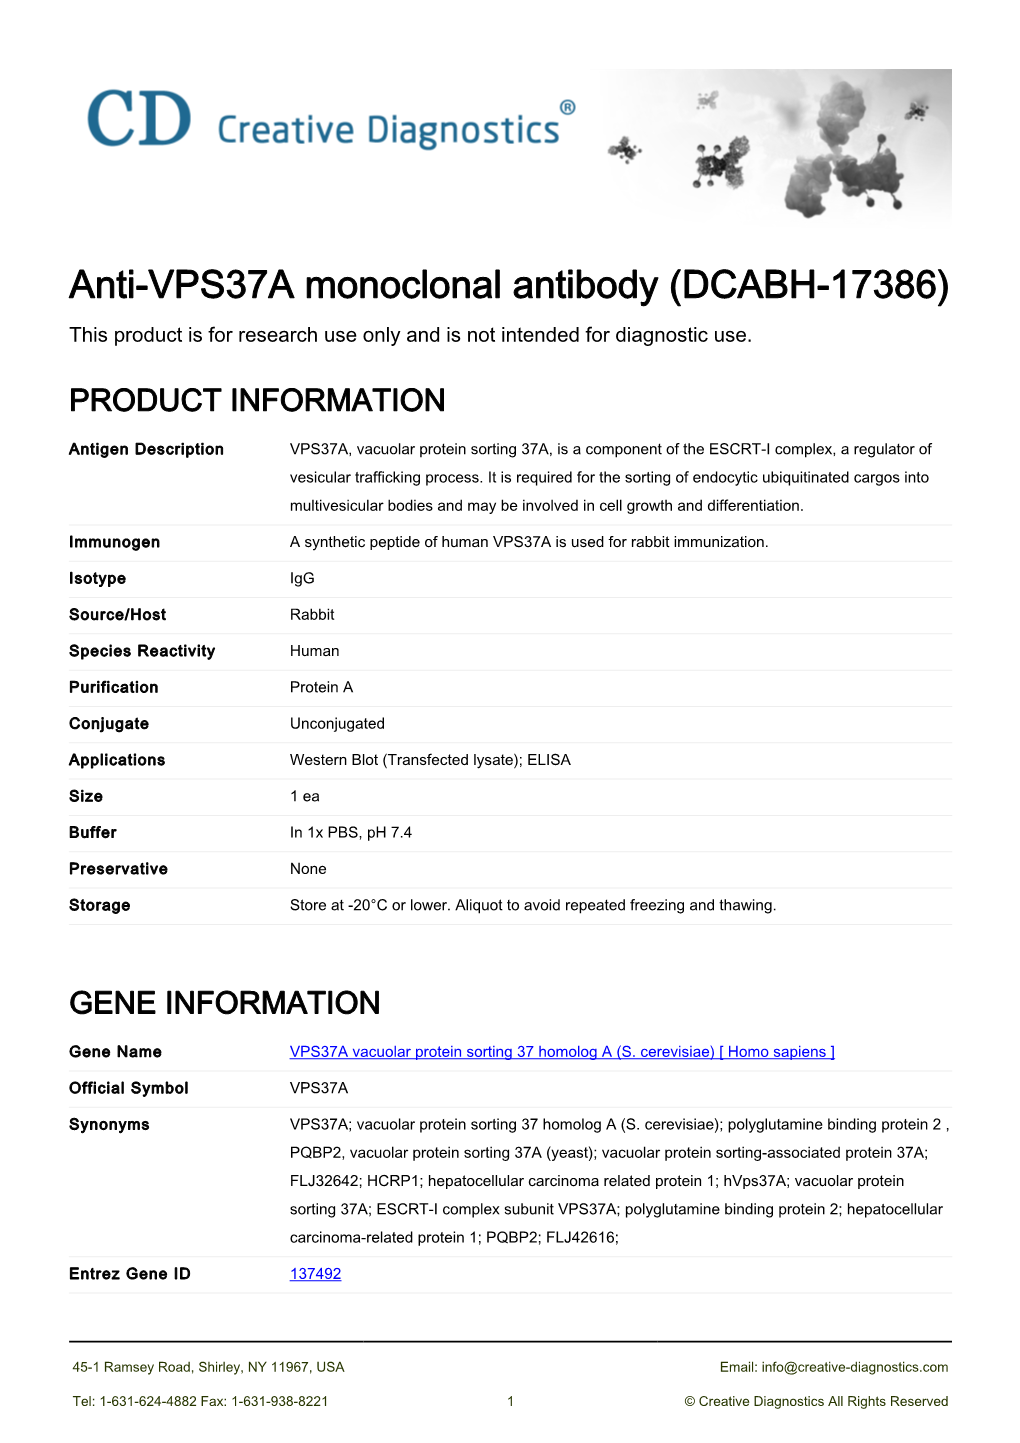 Anti-VPS37A Monoclonal Antibody (DCABH-17386) This Product Is for Research Use Only and Is Not Intended for Diagnostic Use